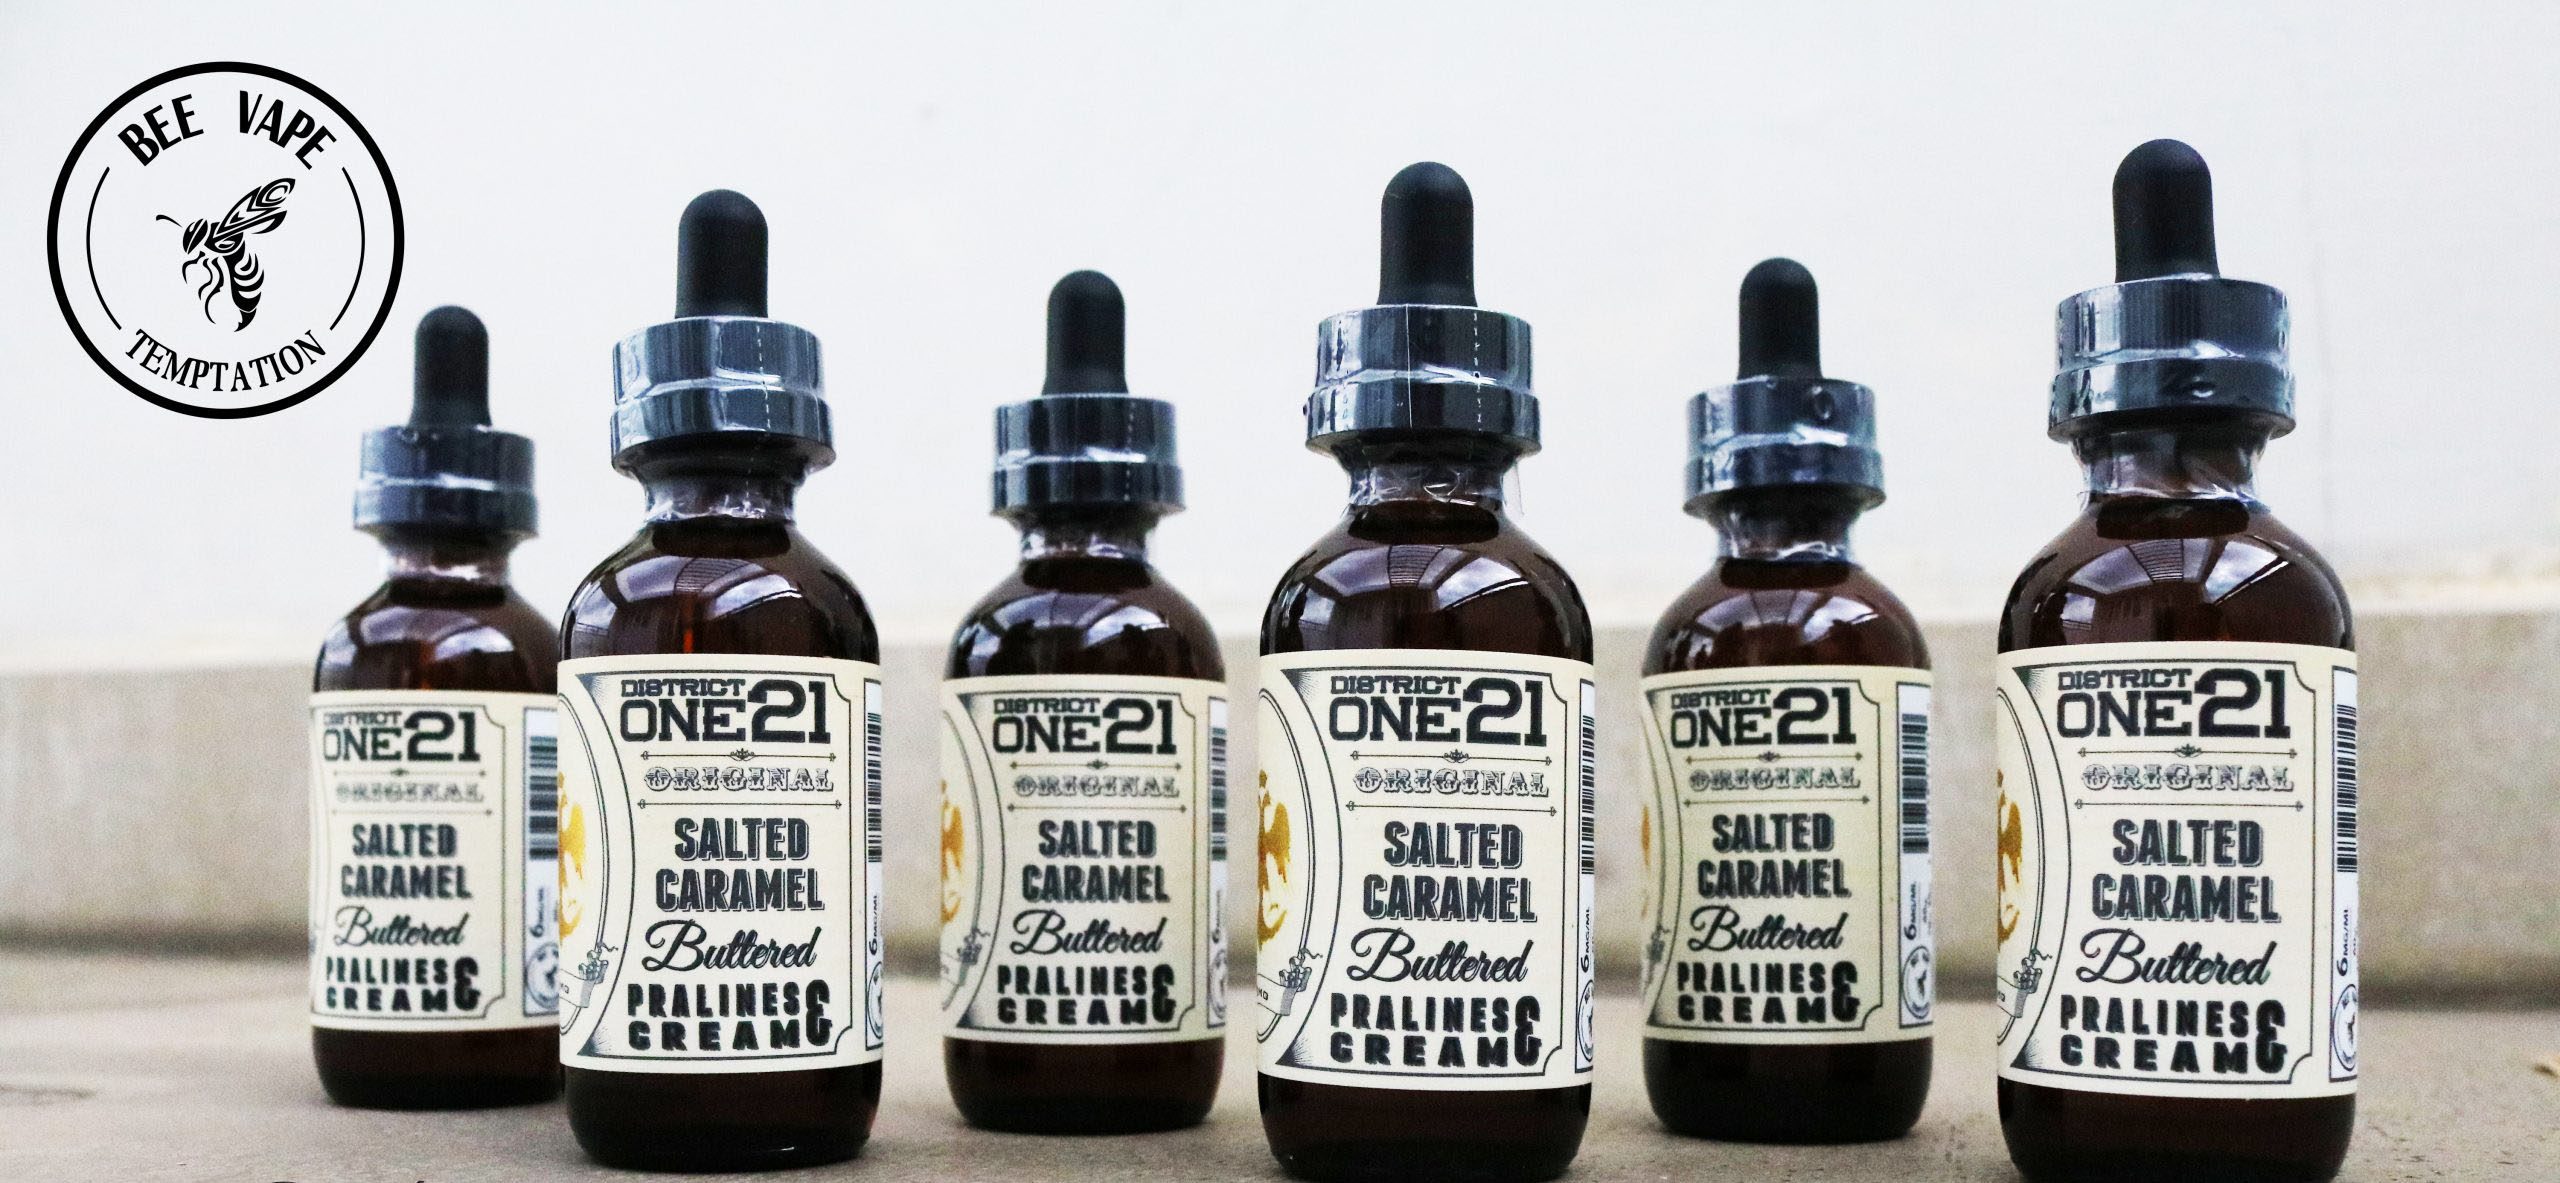 District One21 Salted Caramel By Bee Vape